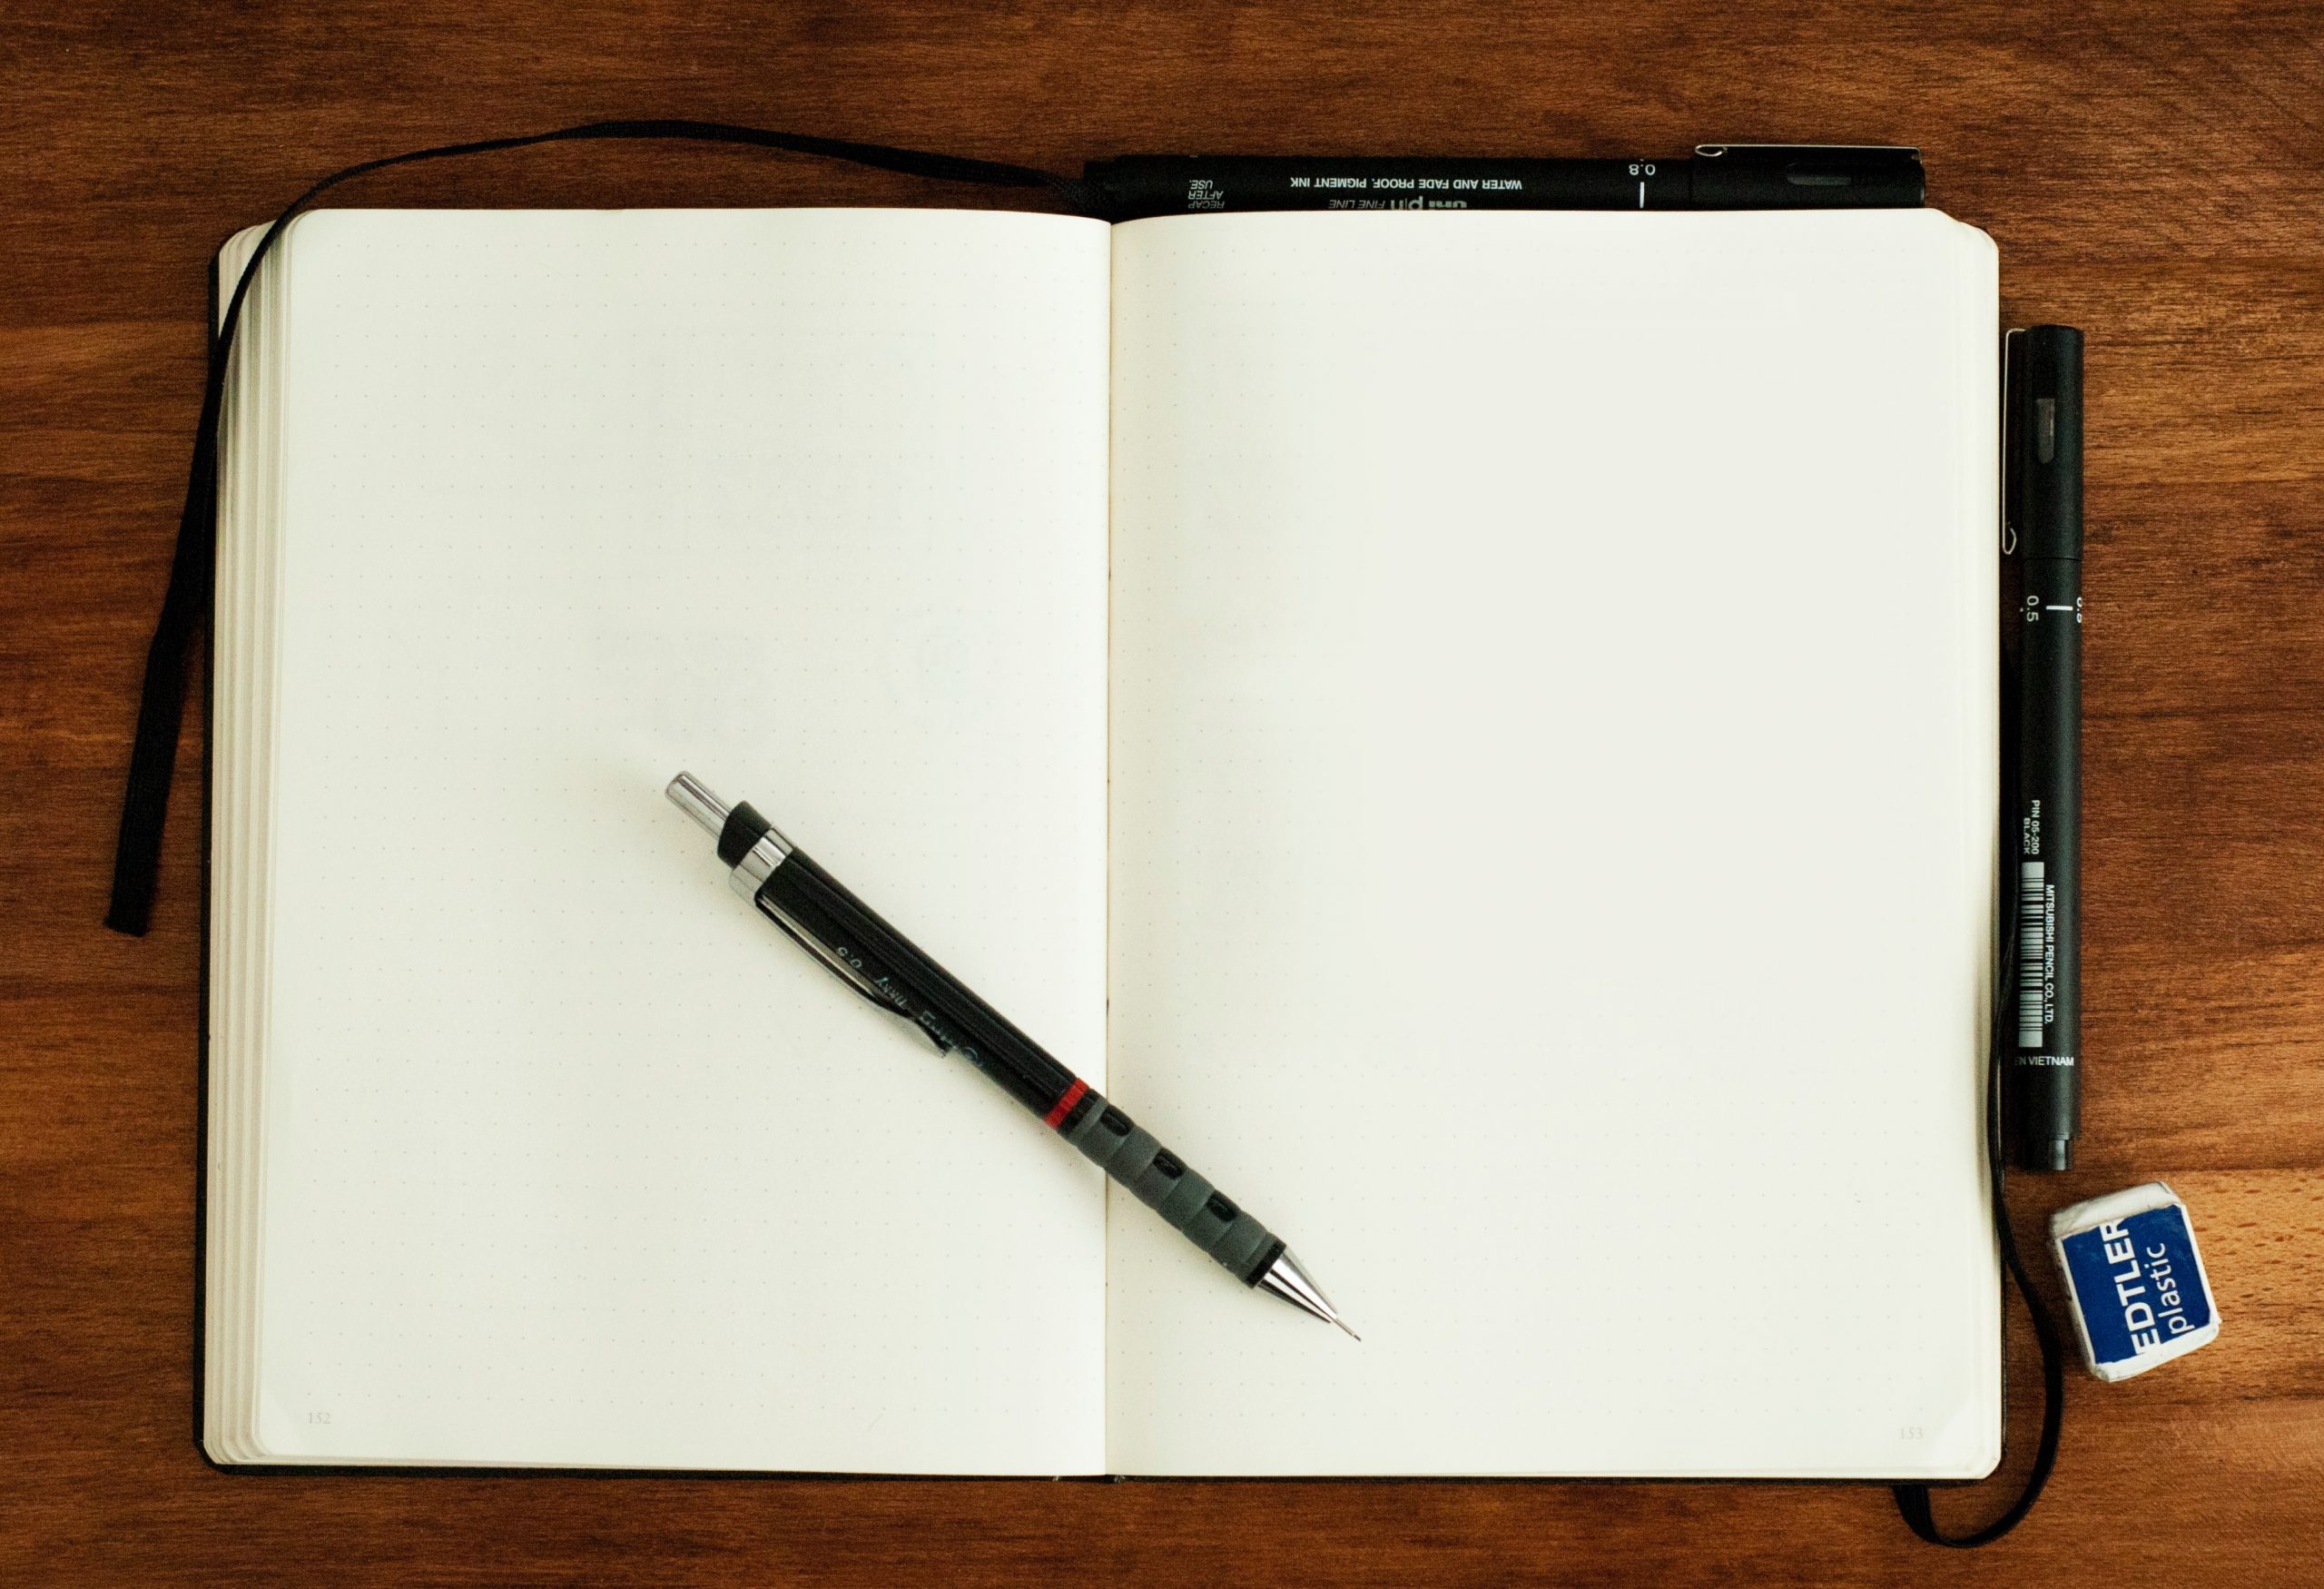 I want to write a book – but where do I start?